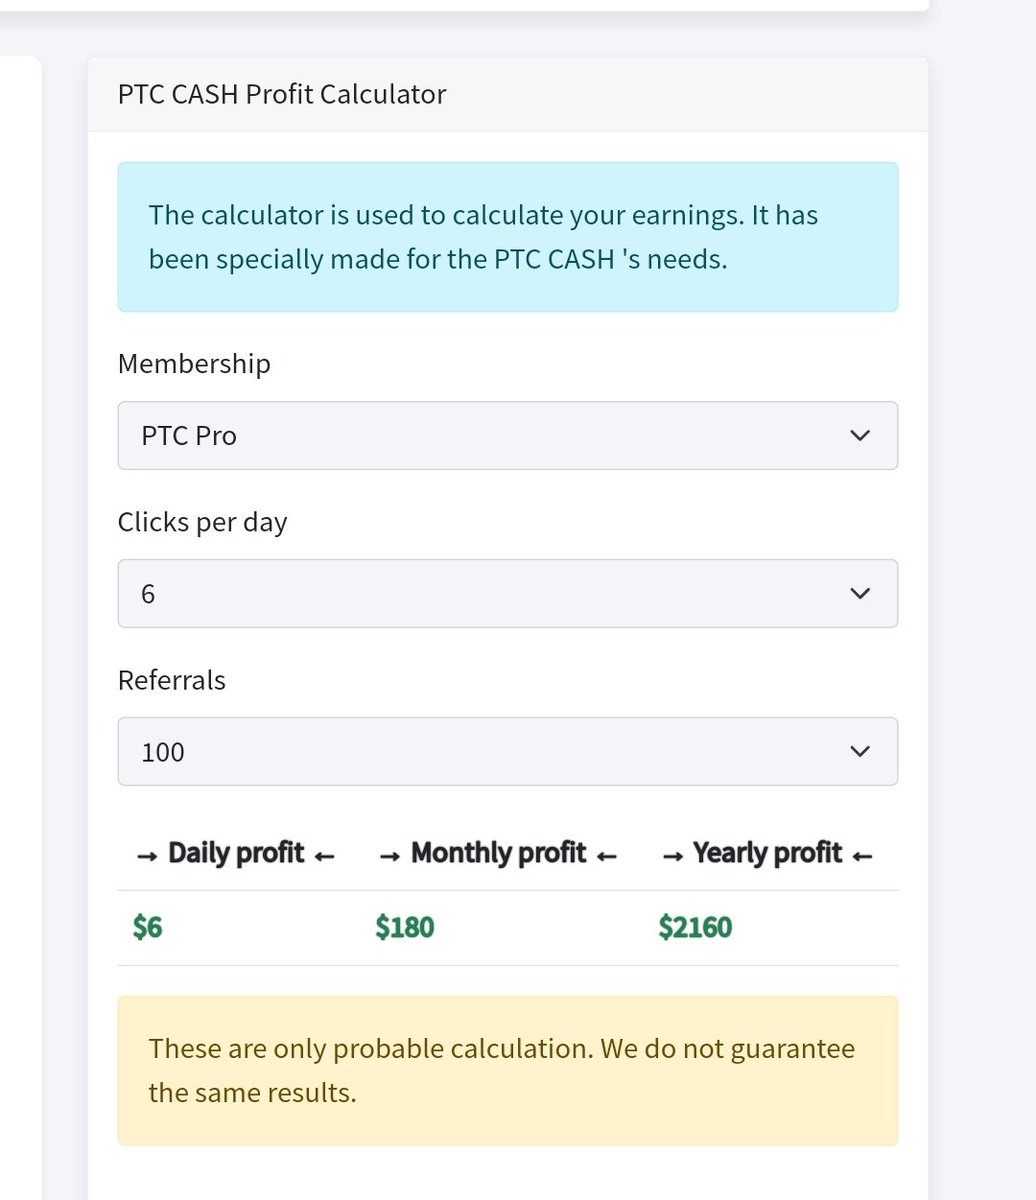 PTCCASH Ads Watching Website,
Profit Calculator, Daily $6 Monthly $180 Yearly $2160
#ptccash #ptcads #makemoneyonlinefree 
Join Free Today
ptccash.com